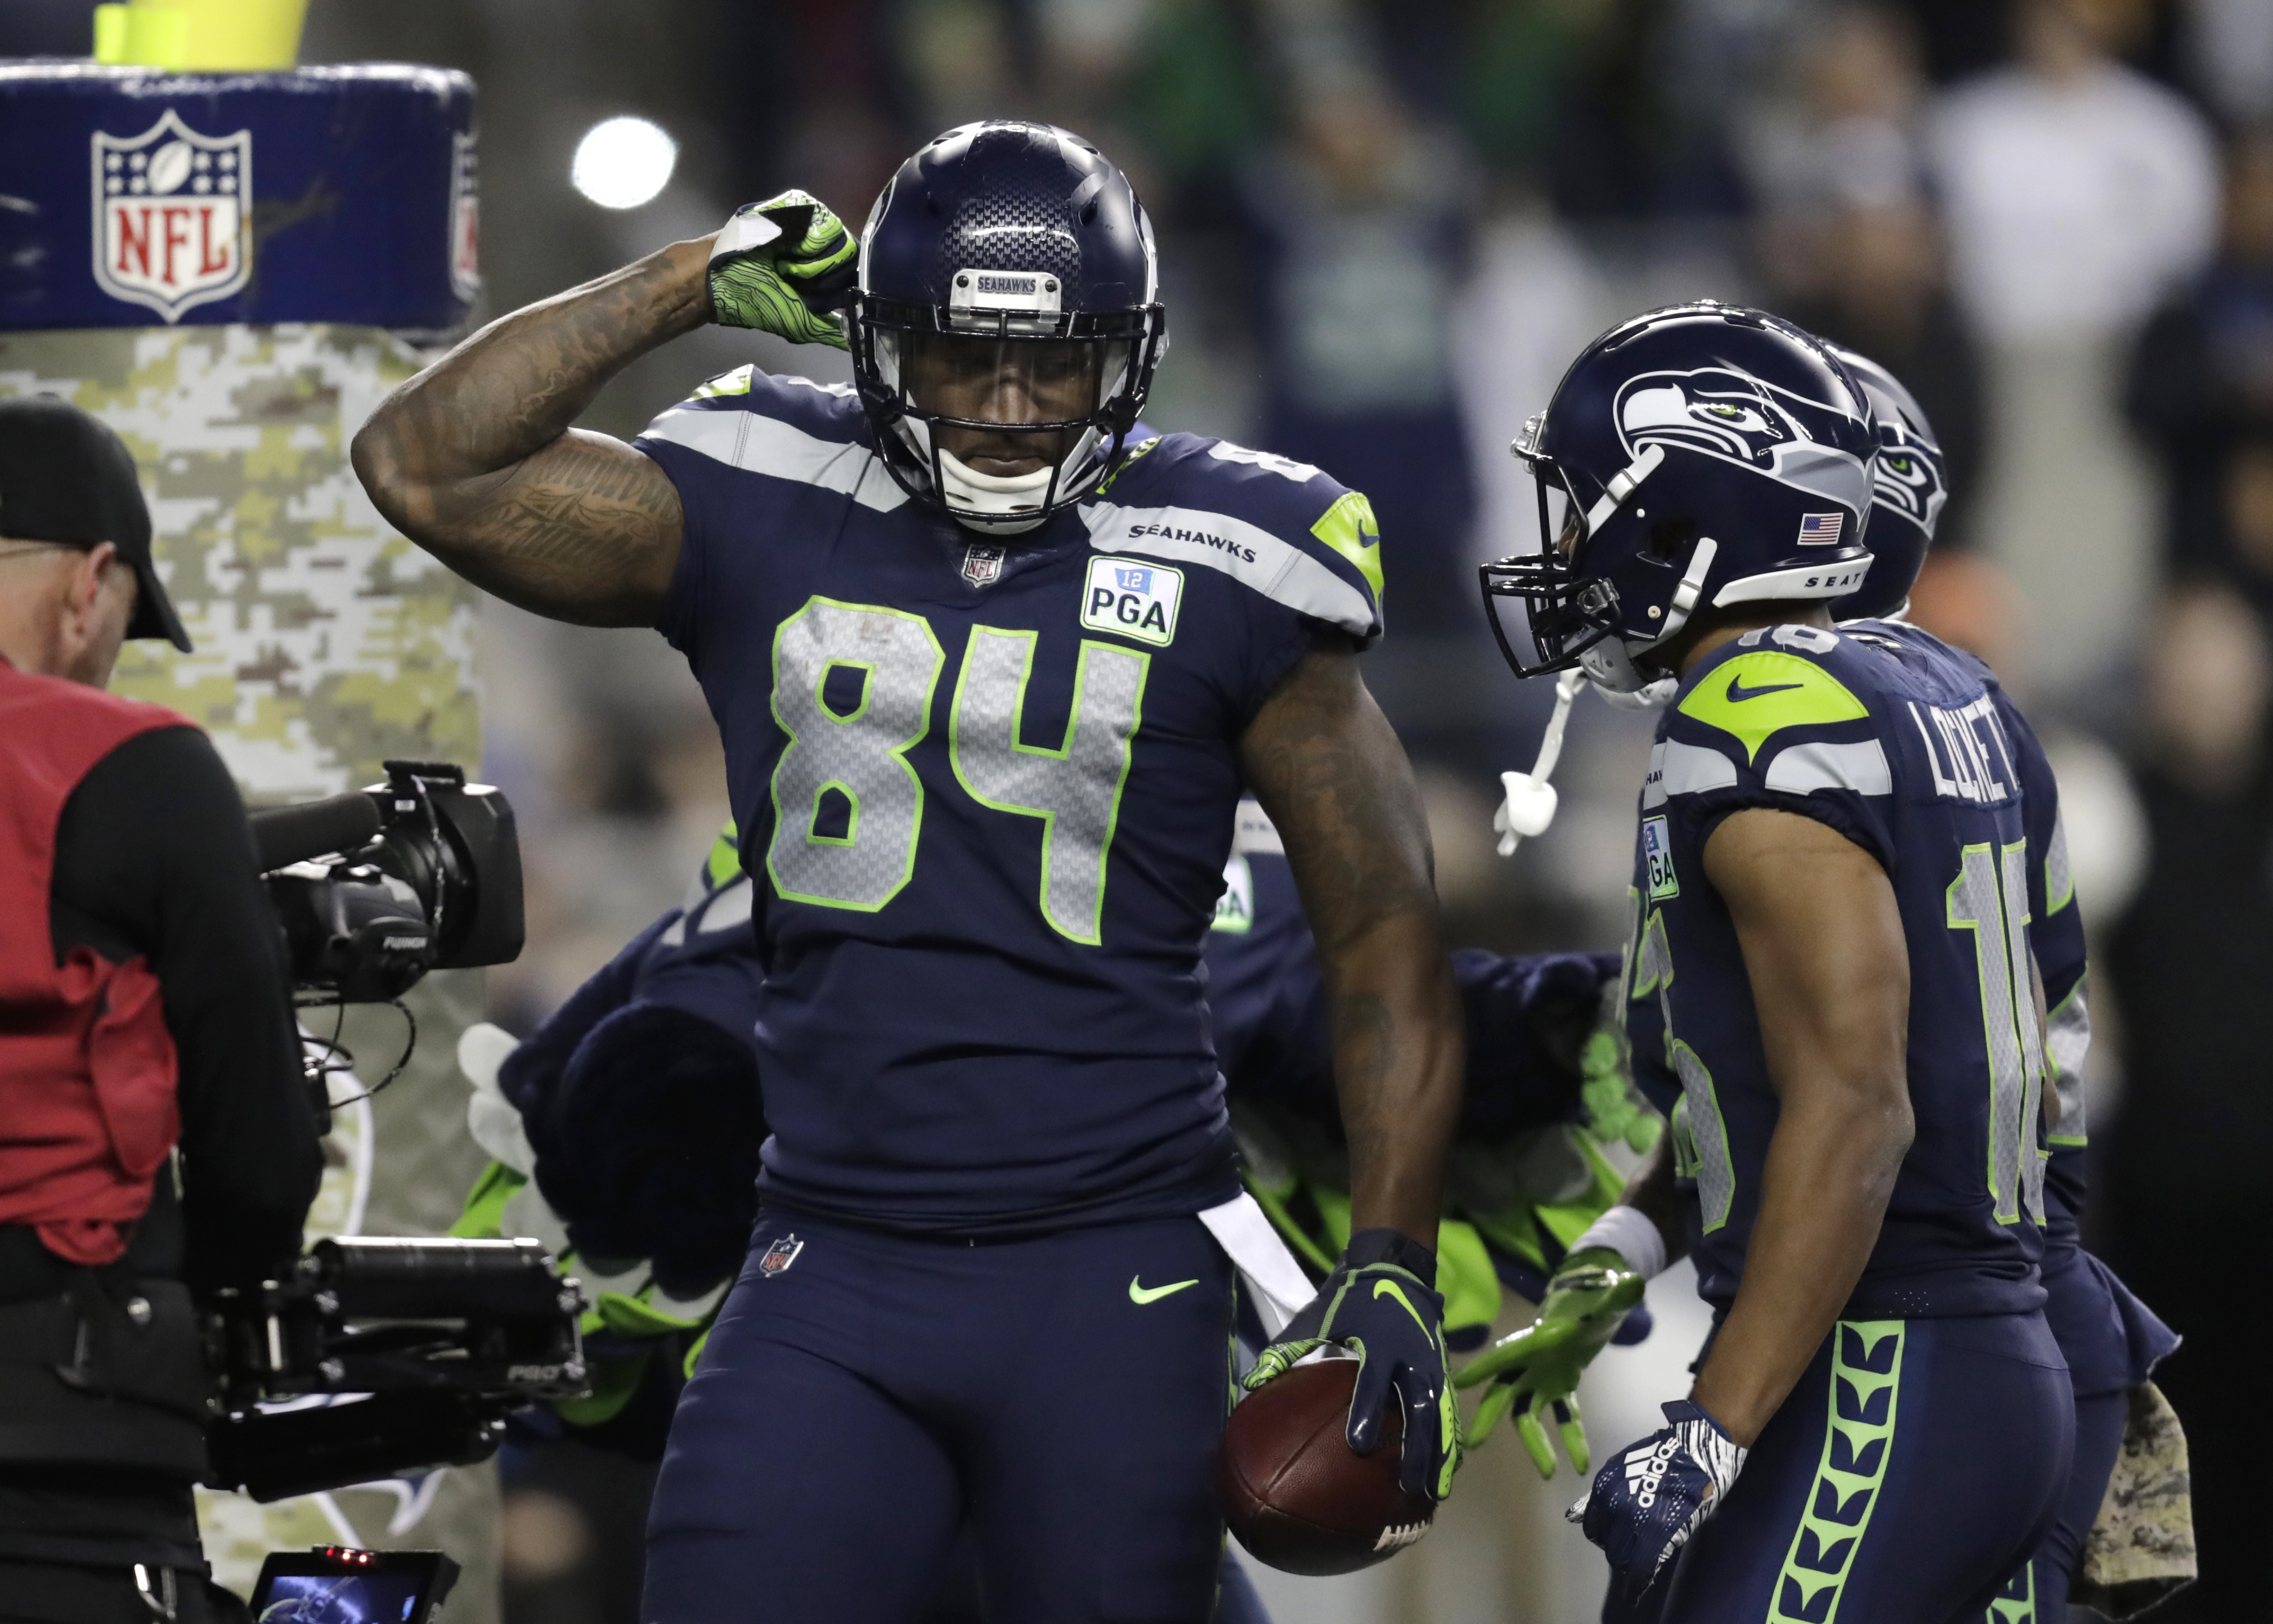 Seahawks get crucial win to stay in NFC playoff conversation